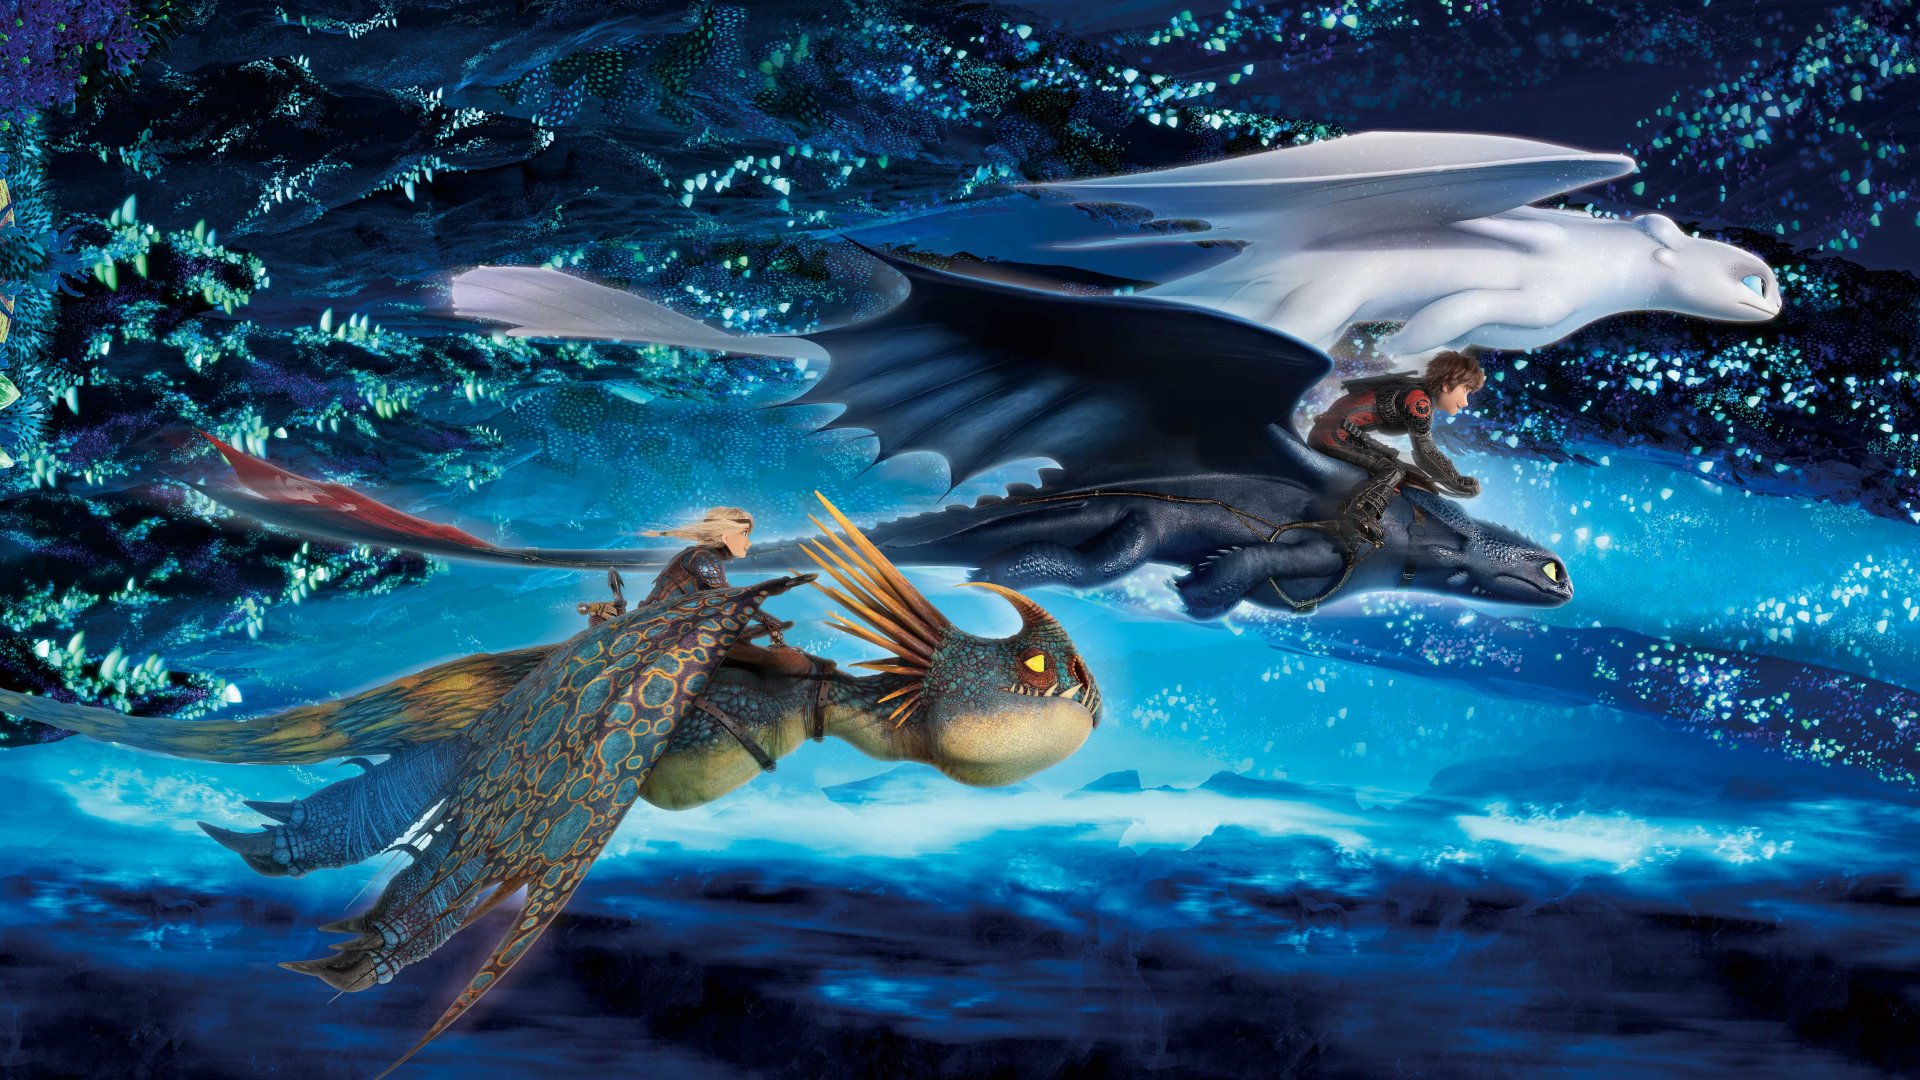 Deadly Nadder How to Train Your Dragon Wallpapers 1920x1080